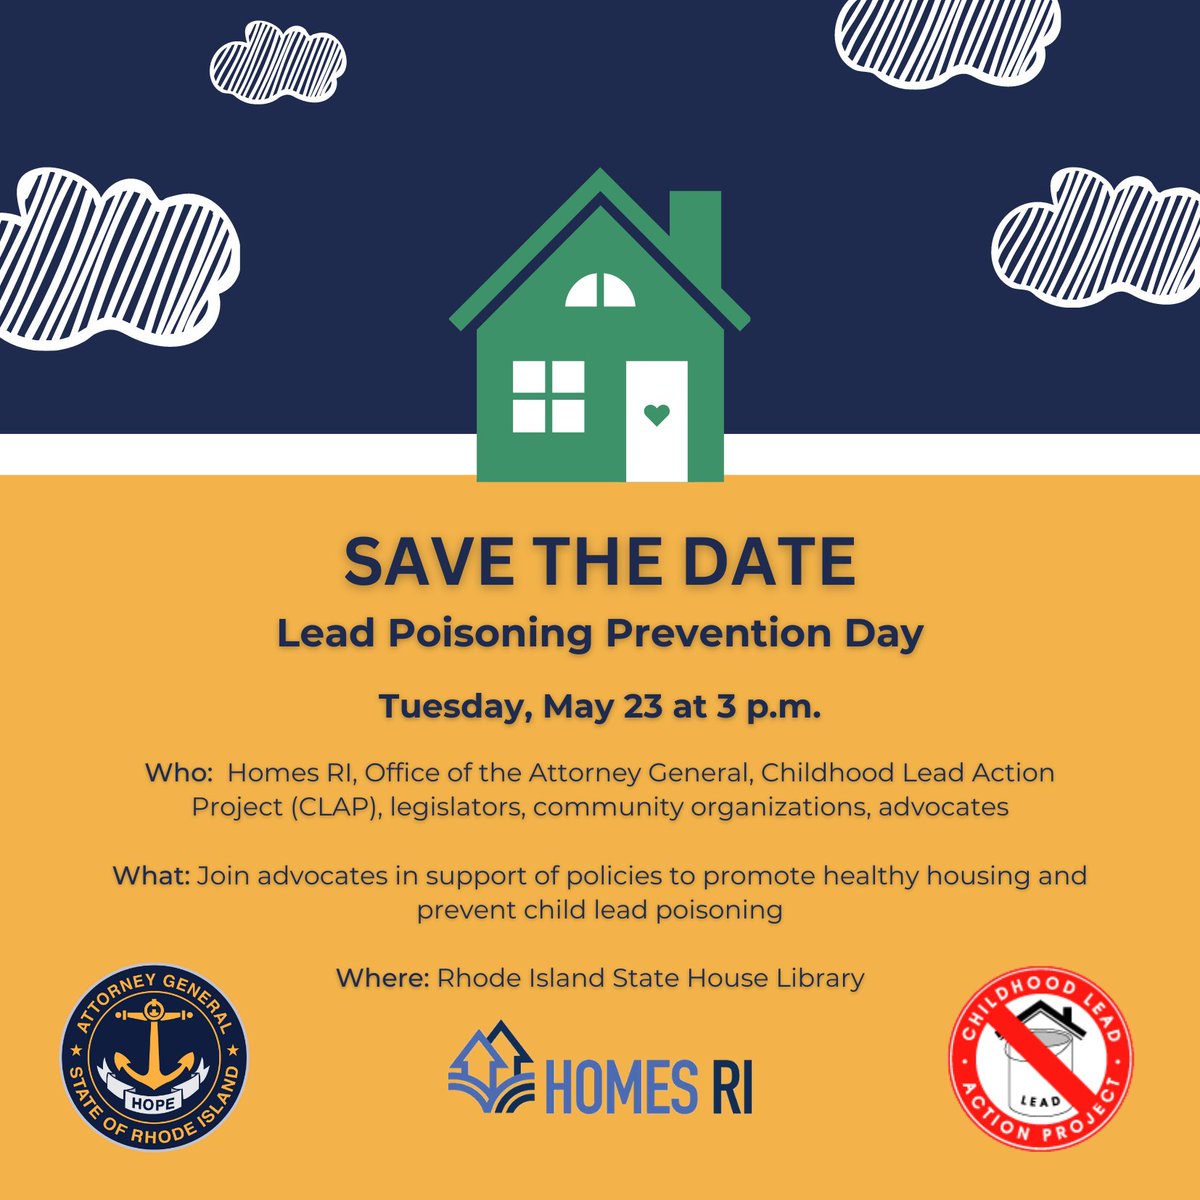 Join us at the State House on May 23 at 3:30 p.m. for Lead Poisoning Prevention Day to support and promote policies for healthier homes free of child lead poisoning! #LeadPoisoningPrevention #LeadFreeFuture #HealthyHomes #SavetheDate #HomesRI